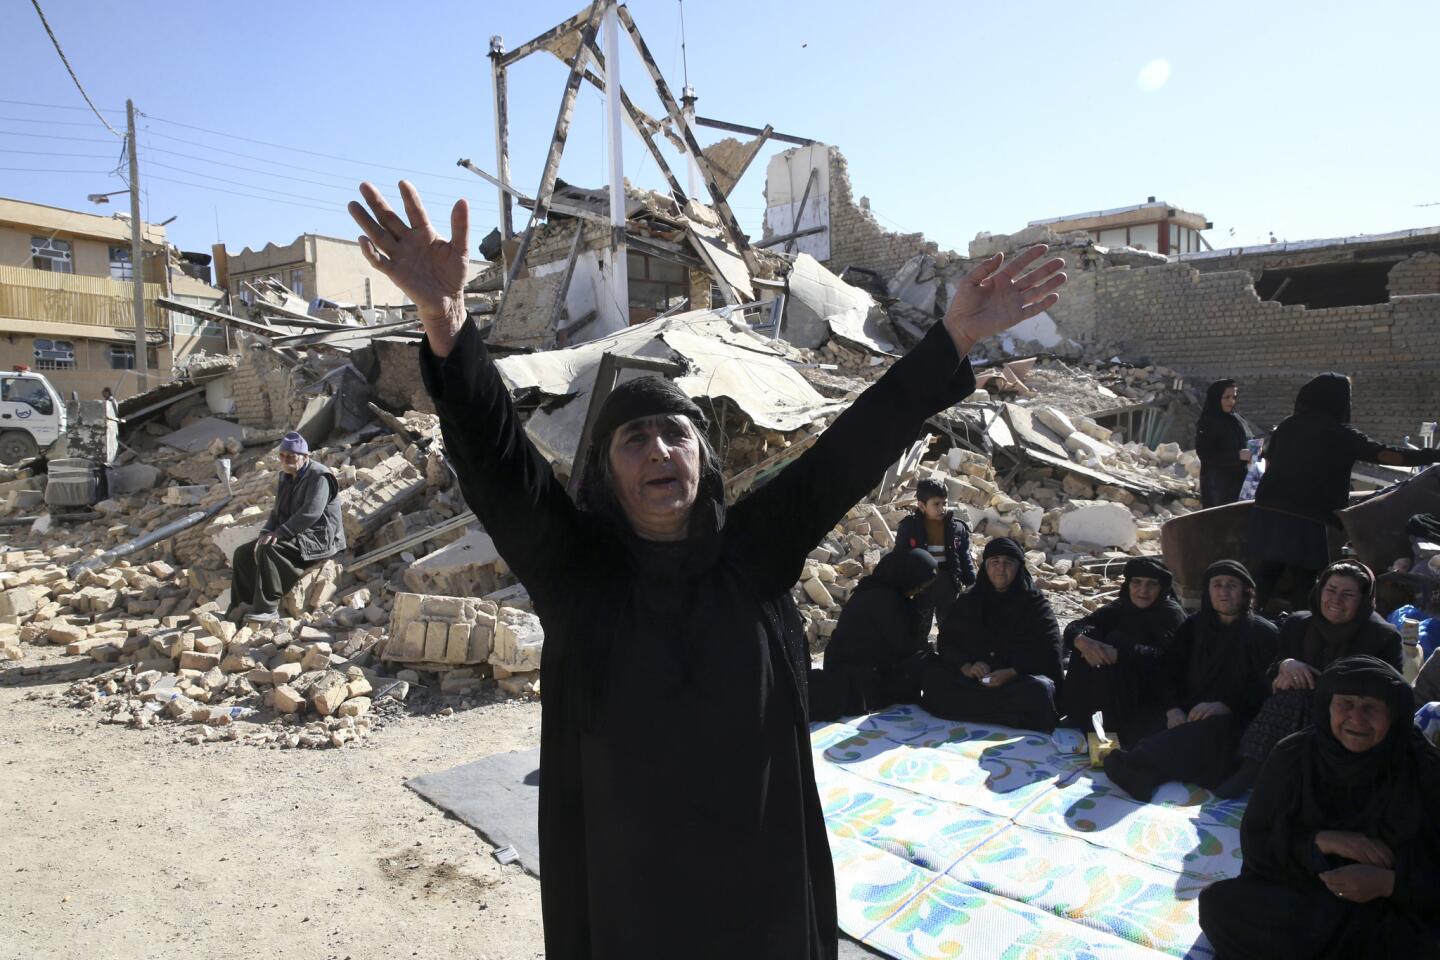 A woman mourns at an earthquake site in Sarpol-e-Zahab in western Iran on Nov. 14, 2017. Rescuers are digging through the debris of buildings felled by the Sunday earthquake in the border region of Iran and Iraq.